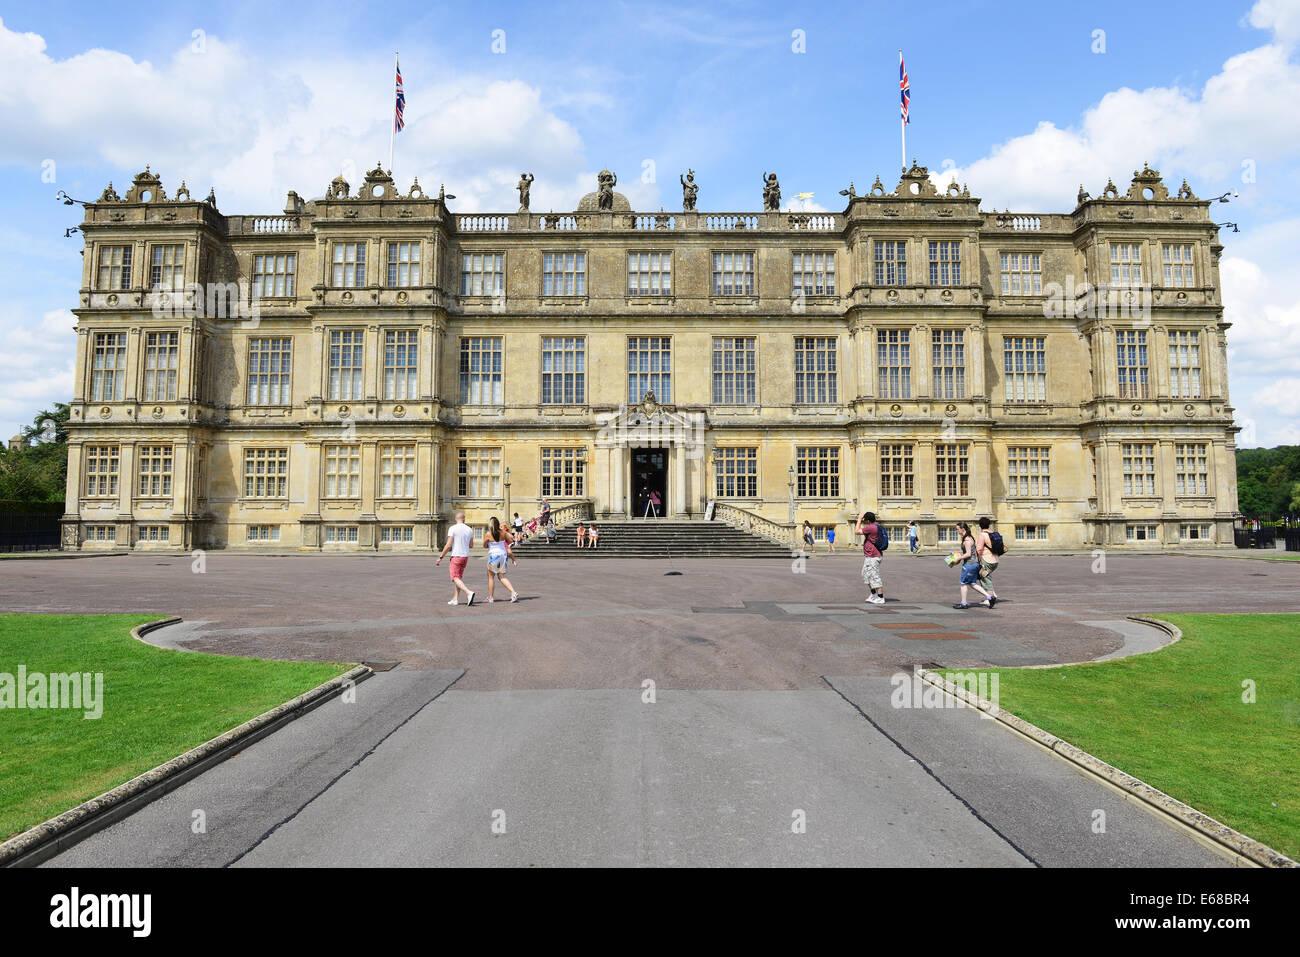 Longleat House, Wiltshire, England, UK Banque D'Images